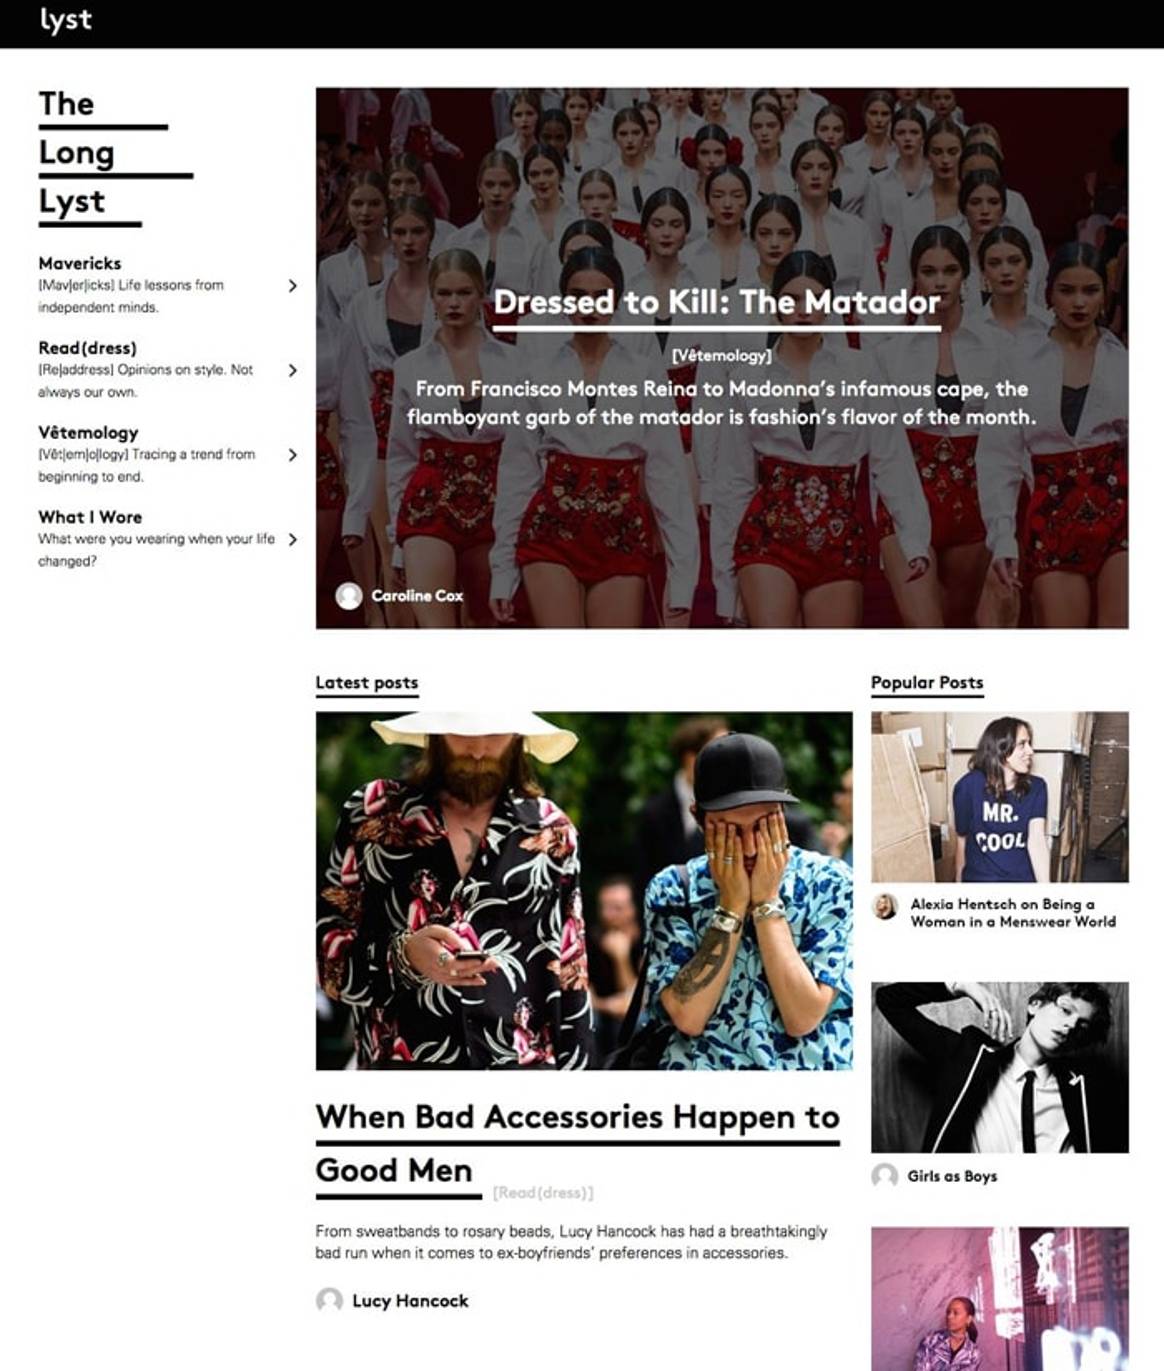 Lyst launches own content channel: The LongLyst